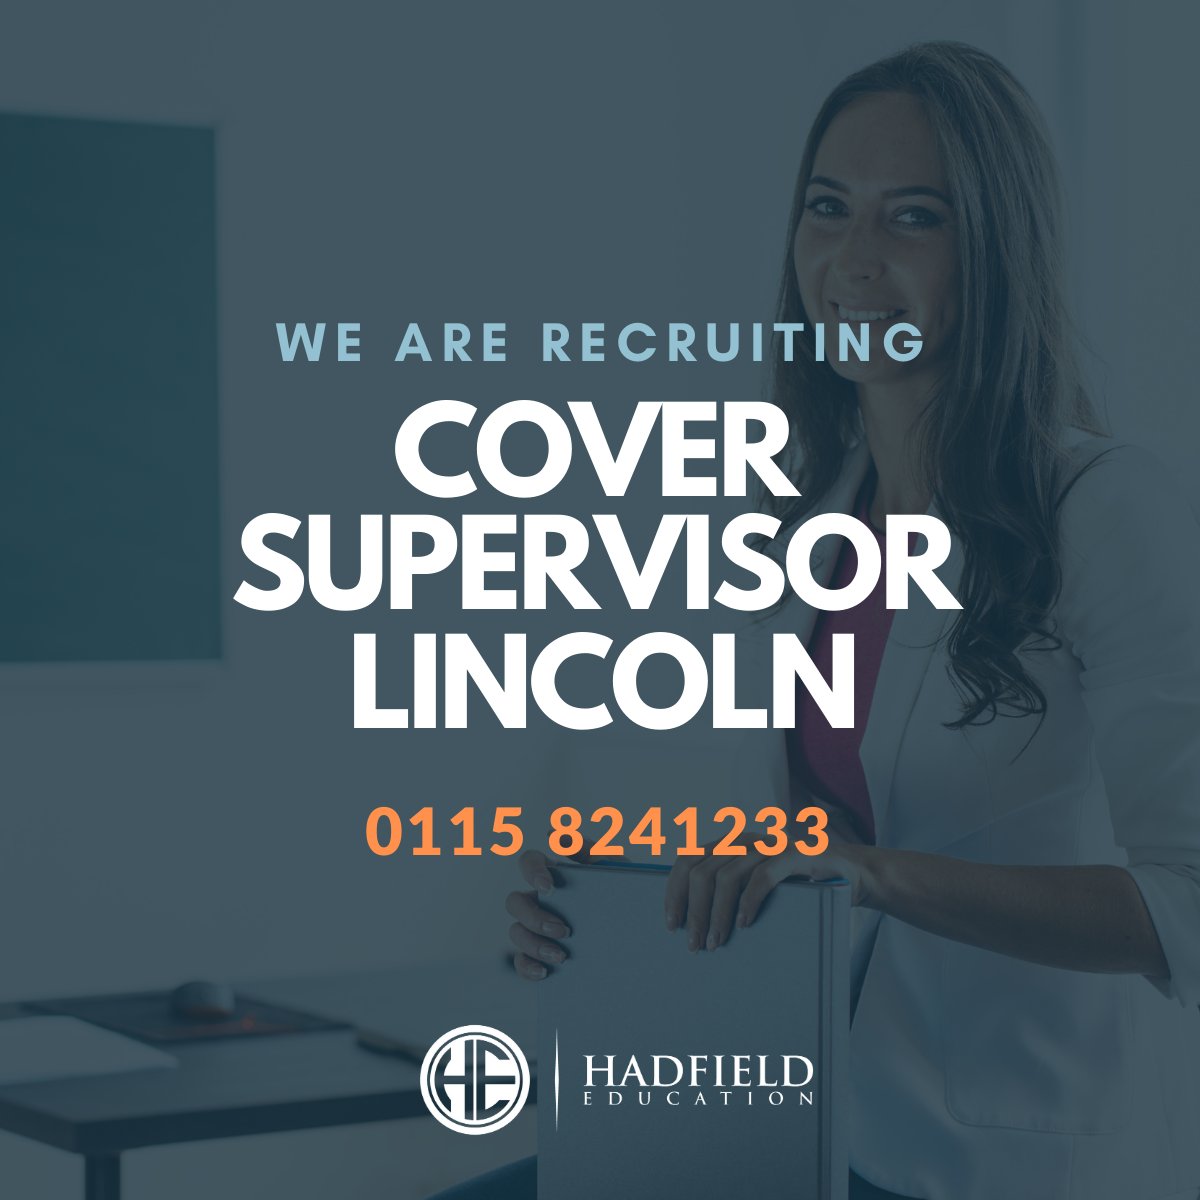 🌟 Fantastic job opportunity! 🌟 We're seeking a Cover Supervisor in 📍Lincoln 🎓 Apply now and be part of our great team! 💼 #LincolnJobs #TeachingJobs #CoverSupervisorJobs 🚀 bit.ly/3OS5WYX